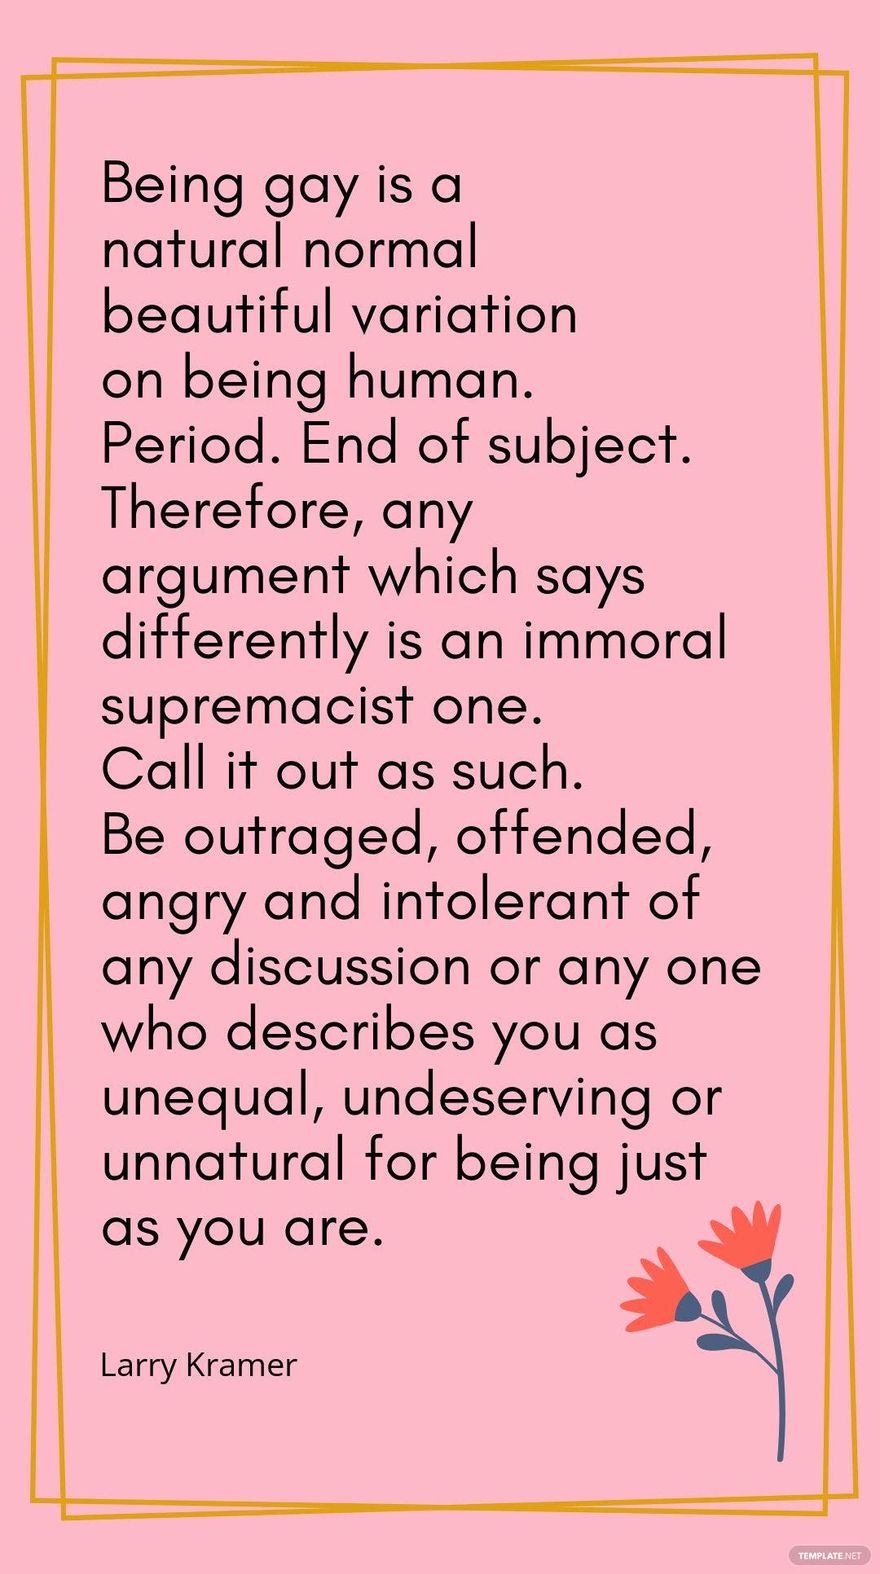 Free Larry Kramer - Being gay is a natural normal beautiful variation on being human. Period. End of subject. Therefore, any argument which says differently is an immoral supremacist one. Call it out as su in JPG